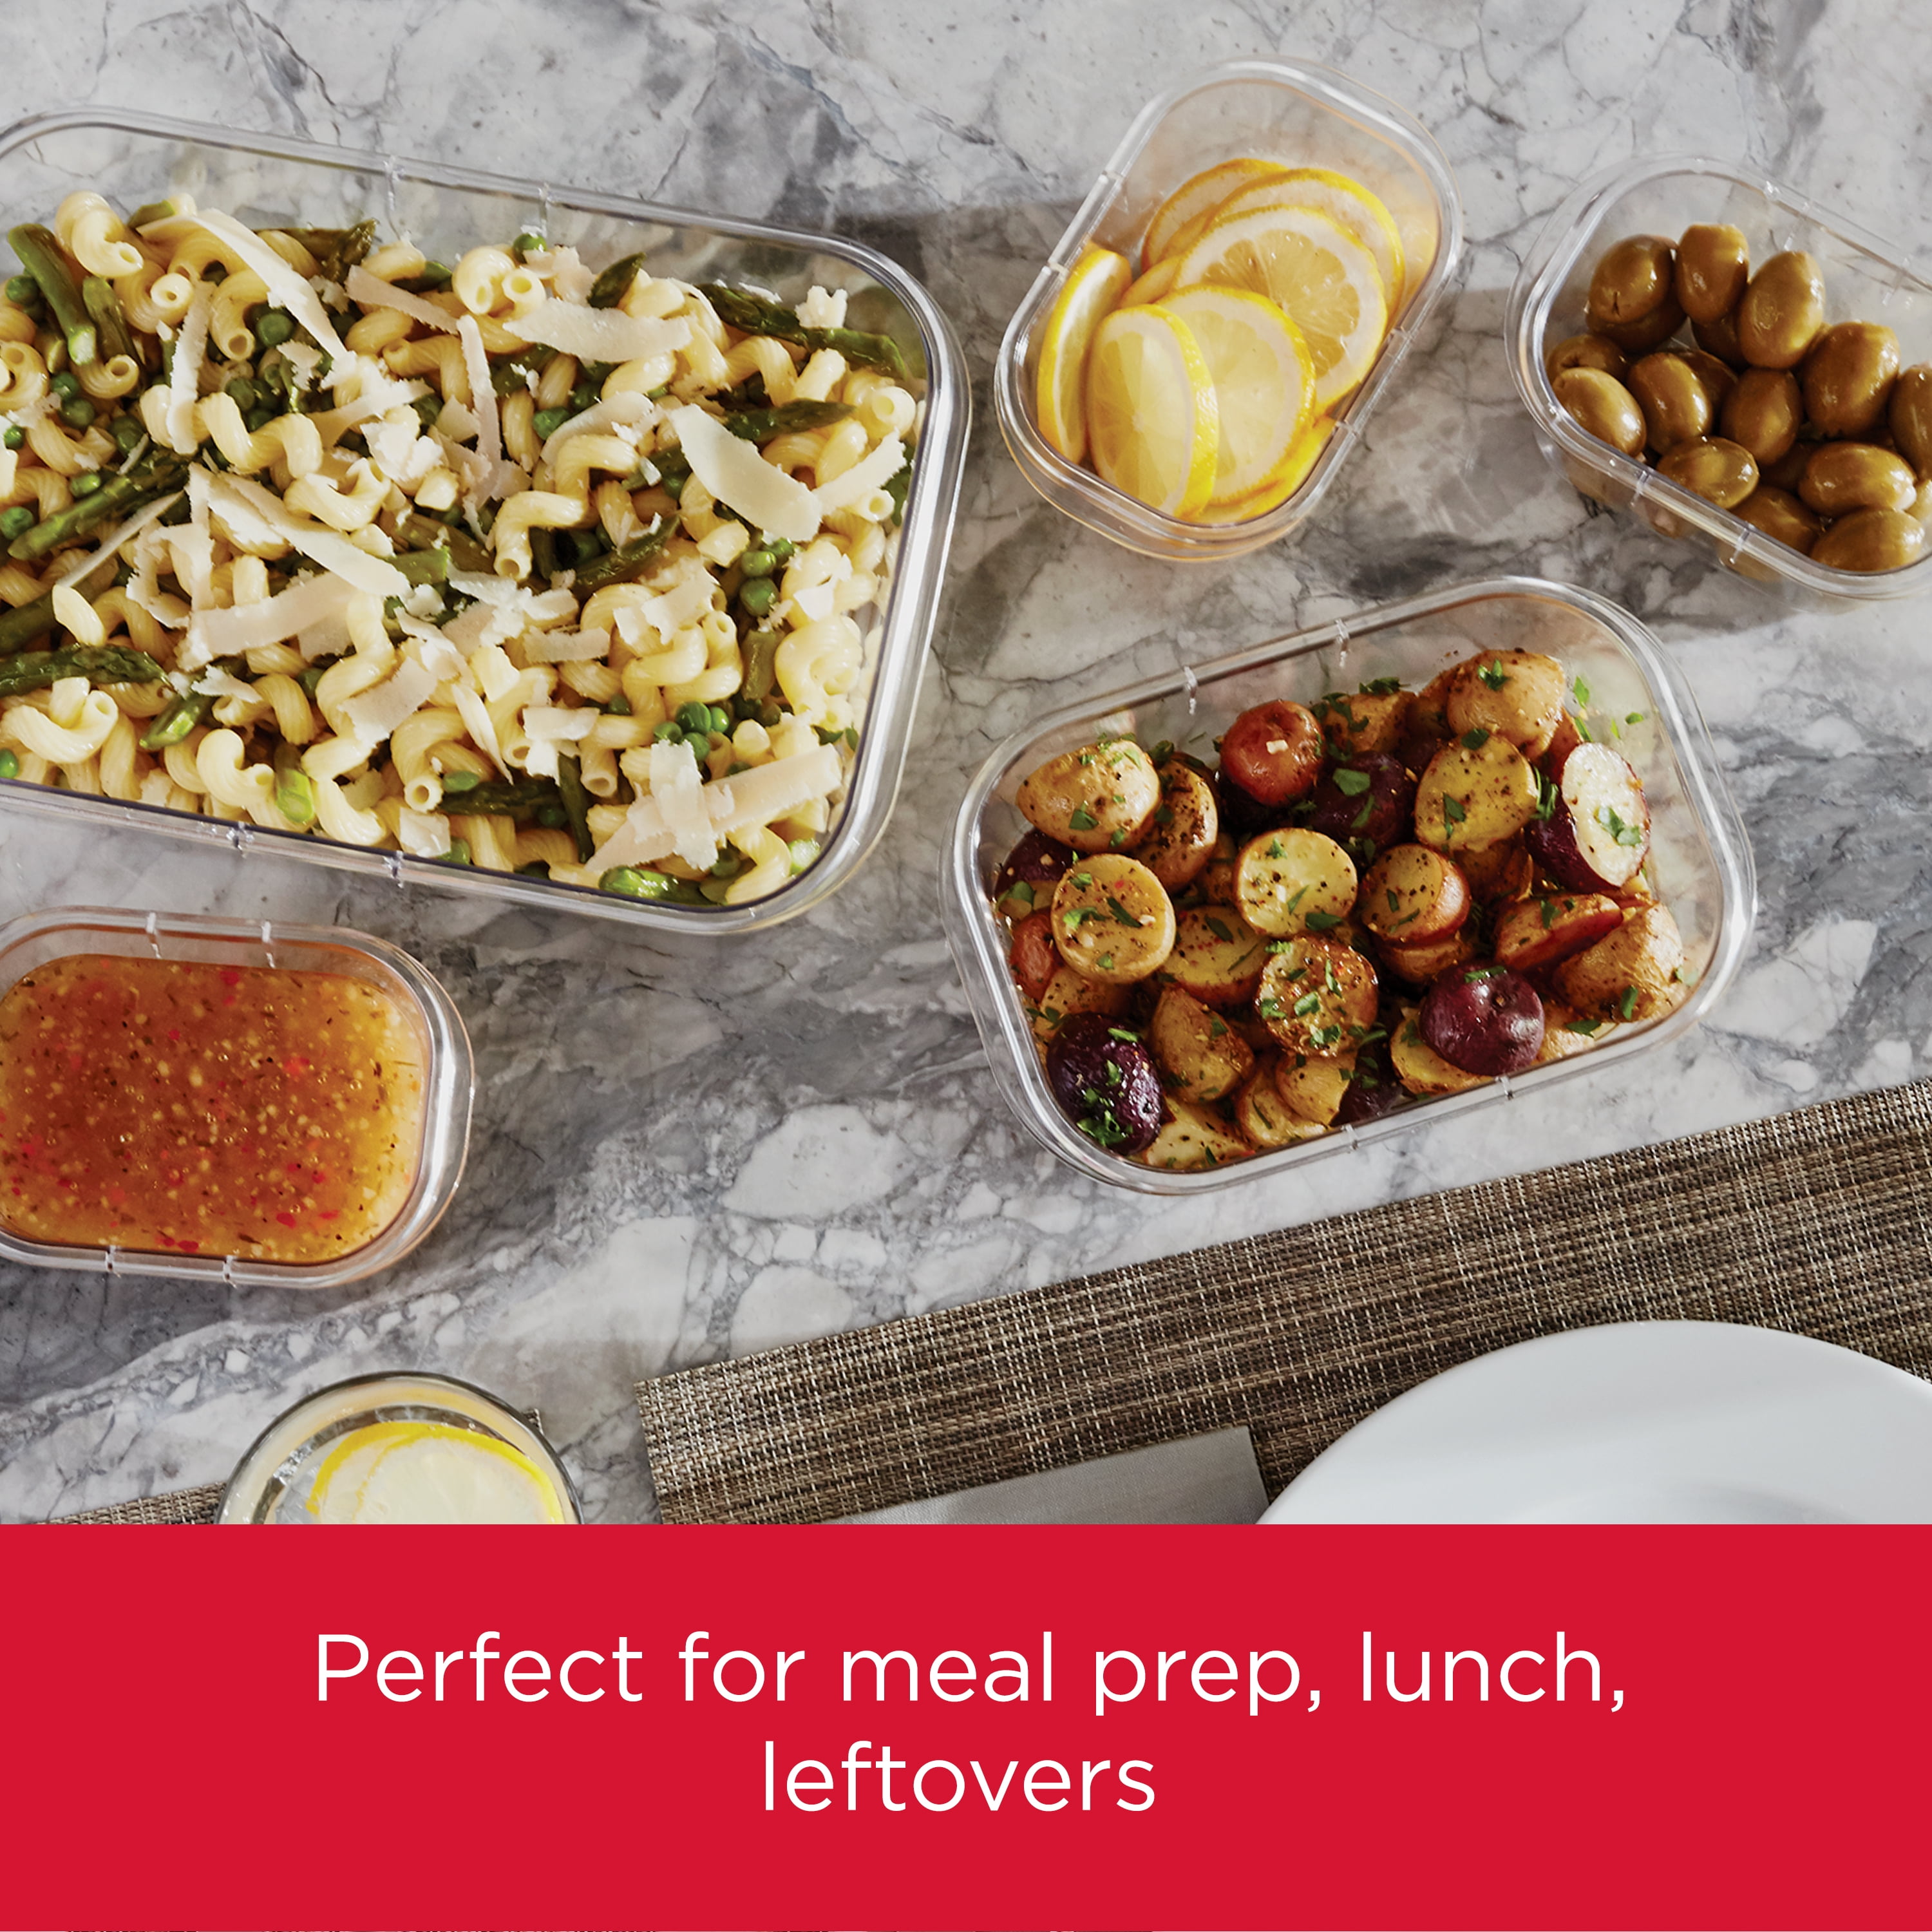 Rubbermaid Brilliance BPA Free Food Storage Containers with Lids, Airtight, for Lunch, Meal Prep, and Leftovers, 2 Compartments, Set of 5 (2.85 Cup)